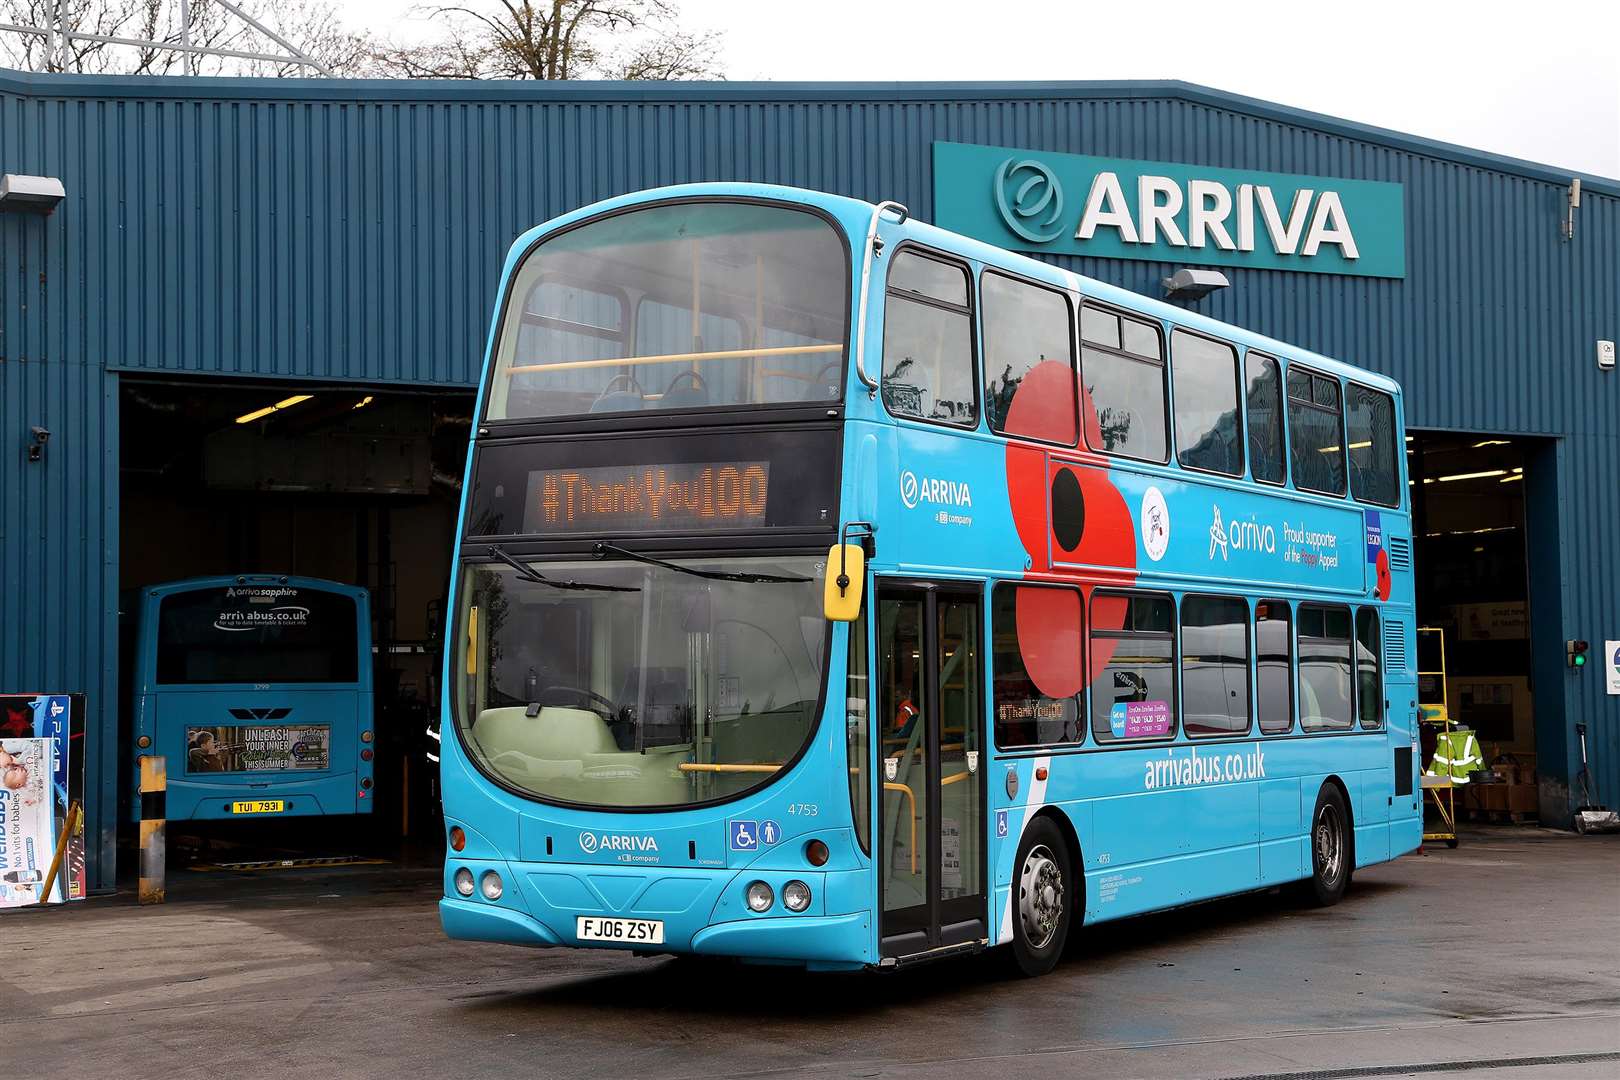 The Thurmaston Branch of the Royal British Legion join Arriva Midlands to launch the 2018 Poppy Appeal with a specially designed Poppy Bus, seen here at their Arriva Thurmaston Depot, Thurmaston, Leics, on November 1, 2018. (5318556)